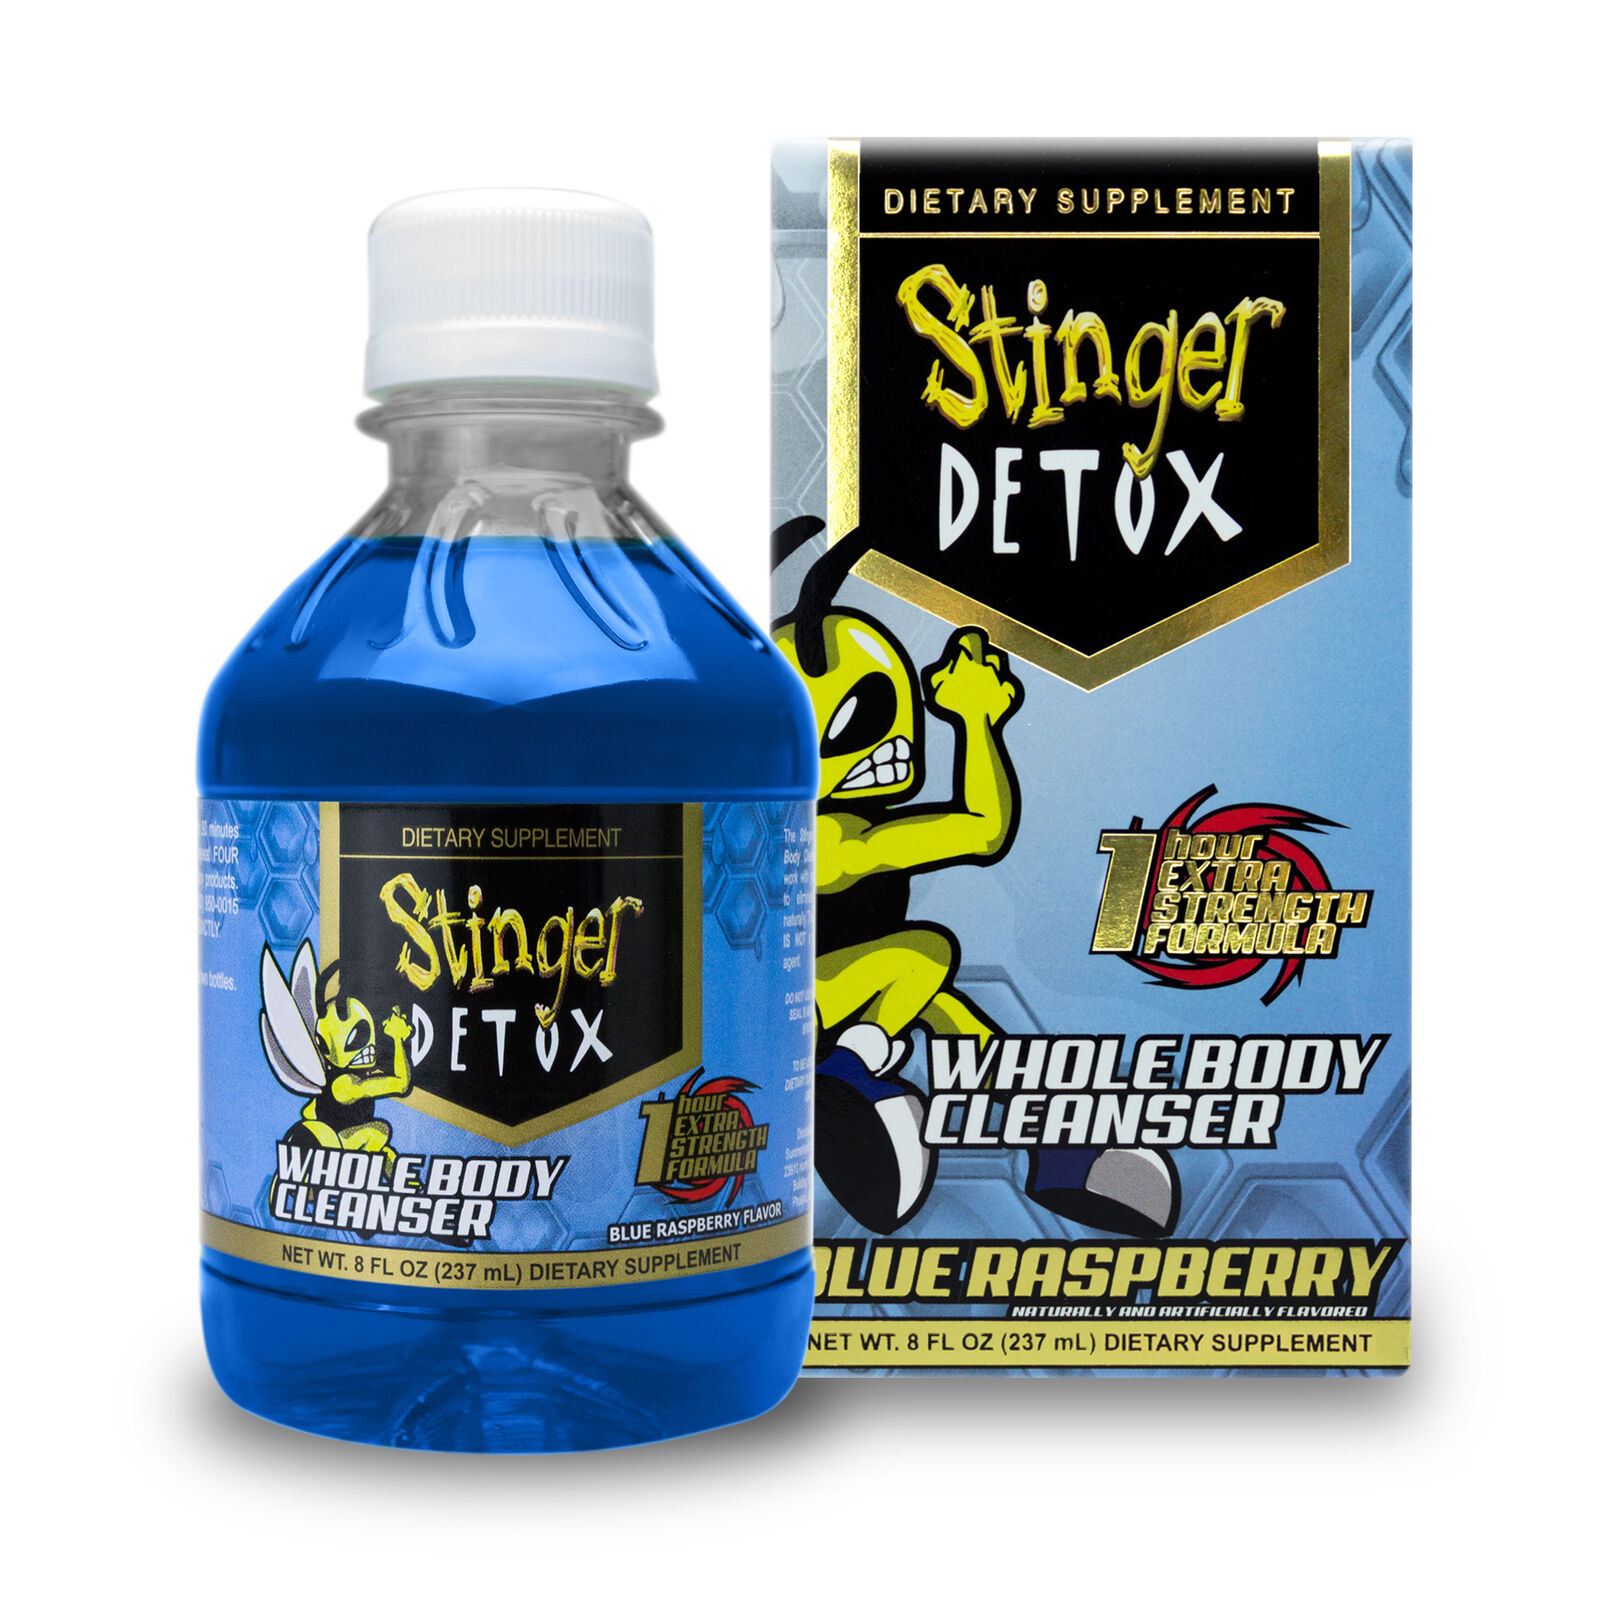 Stinger Detox Whole Body Cleanser 1 R Surprise Shipping included price Hour Strength Blue – Extra